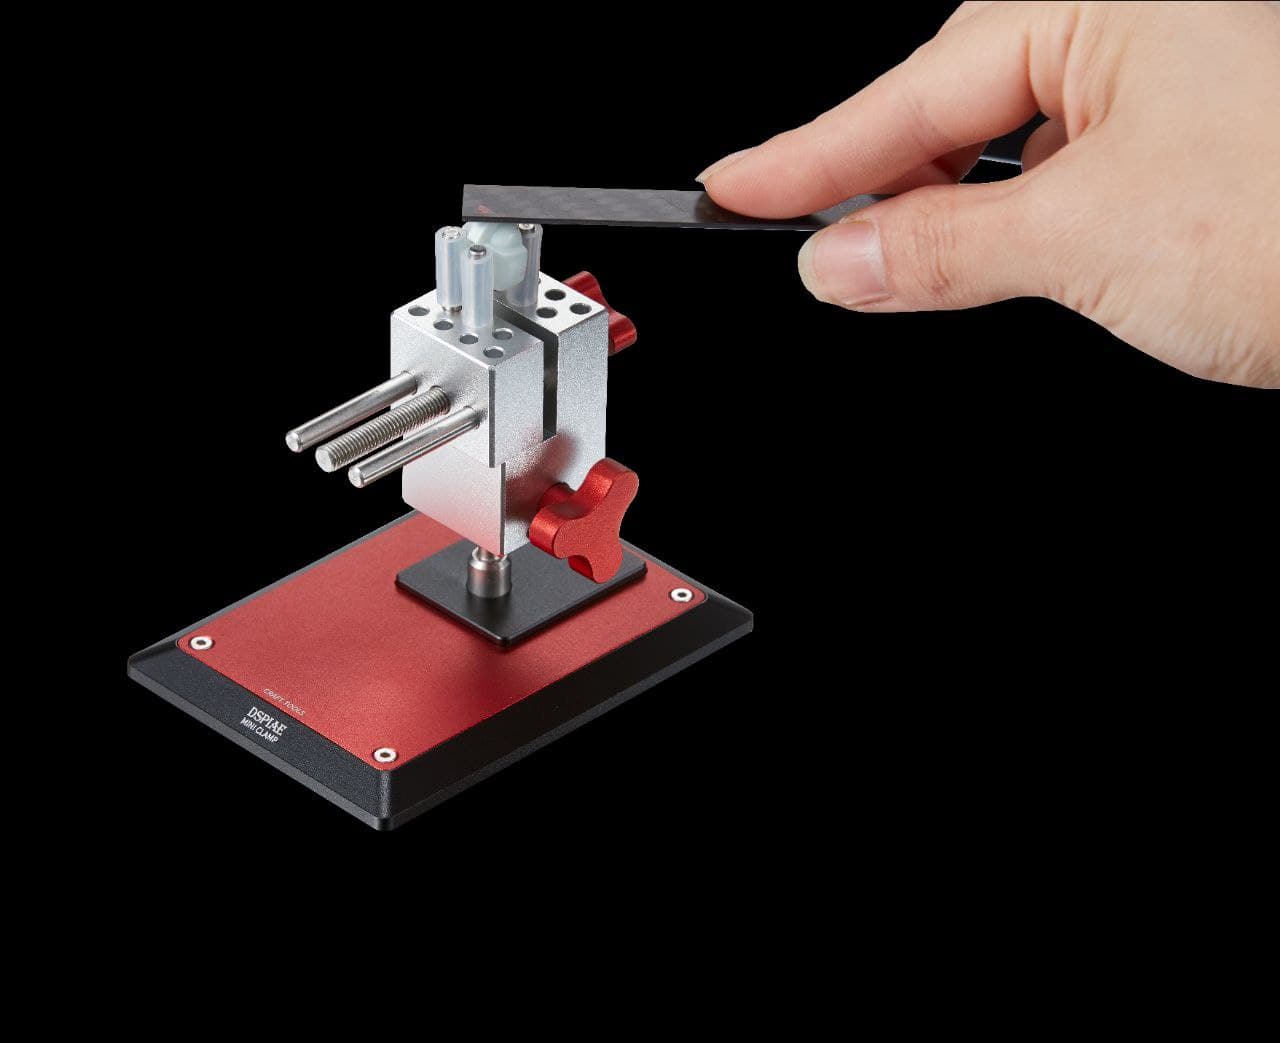 DSPIAE AT-TV Table Vise